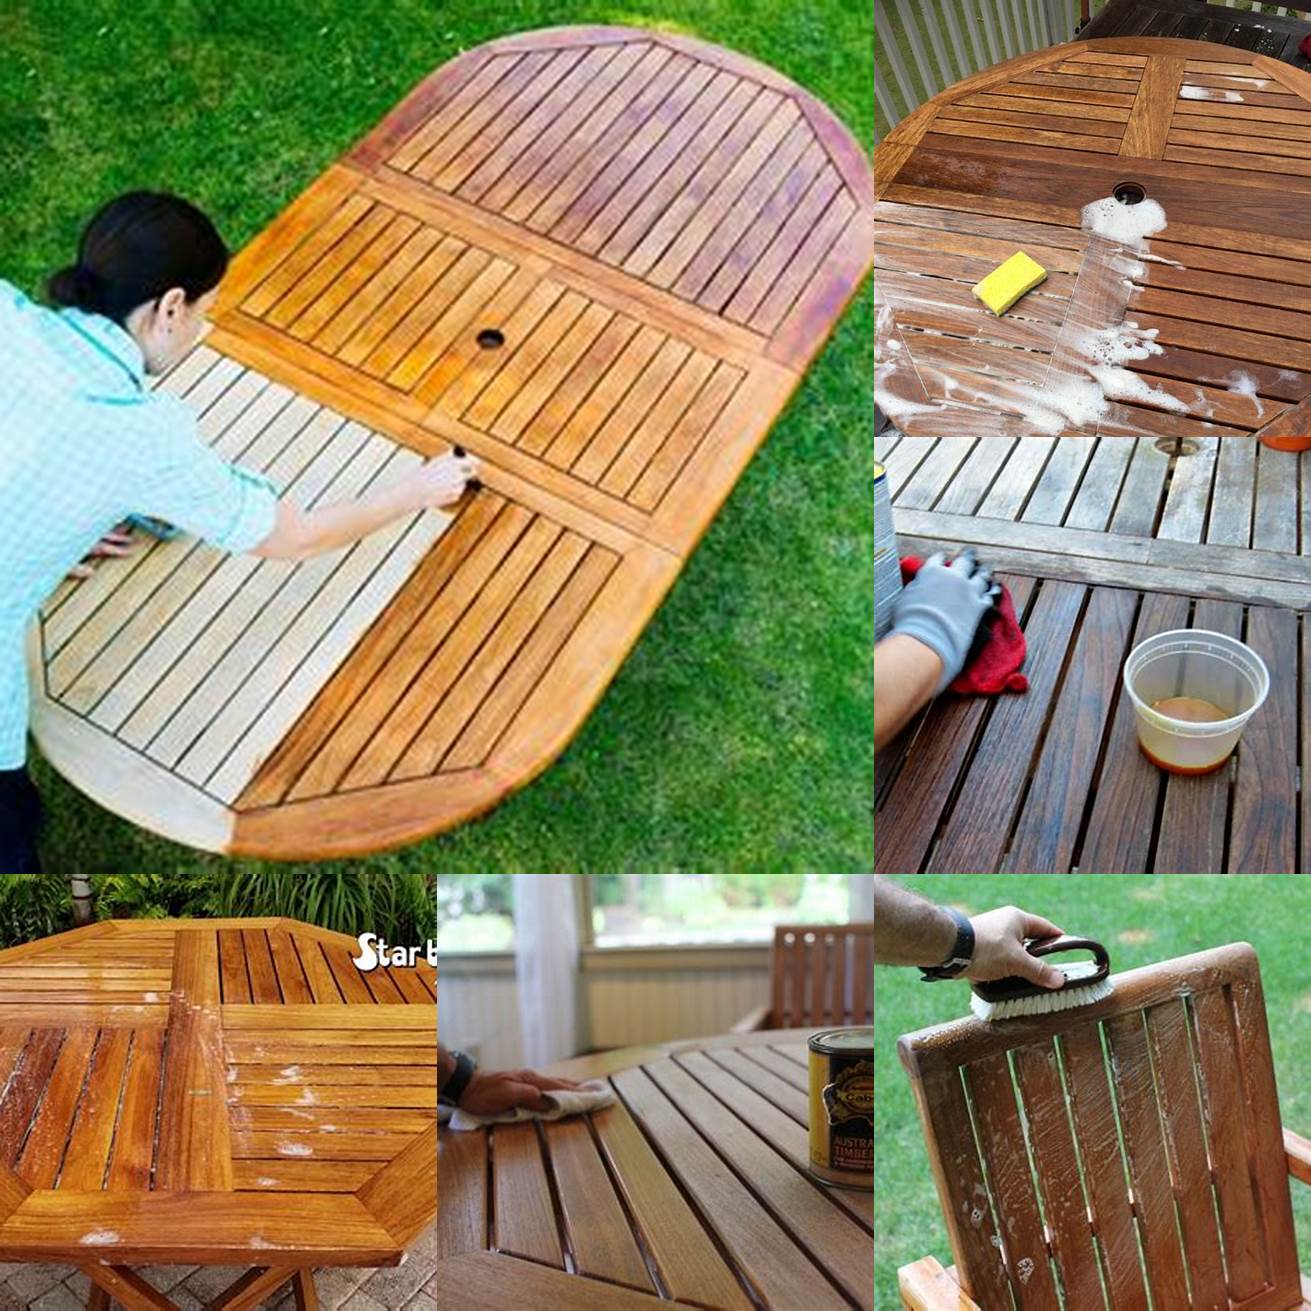 Cleaning the Teak Table